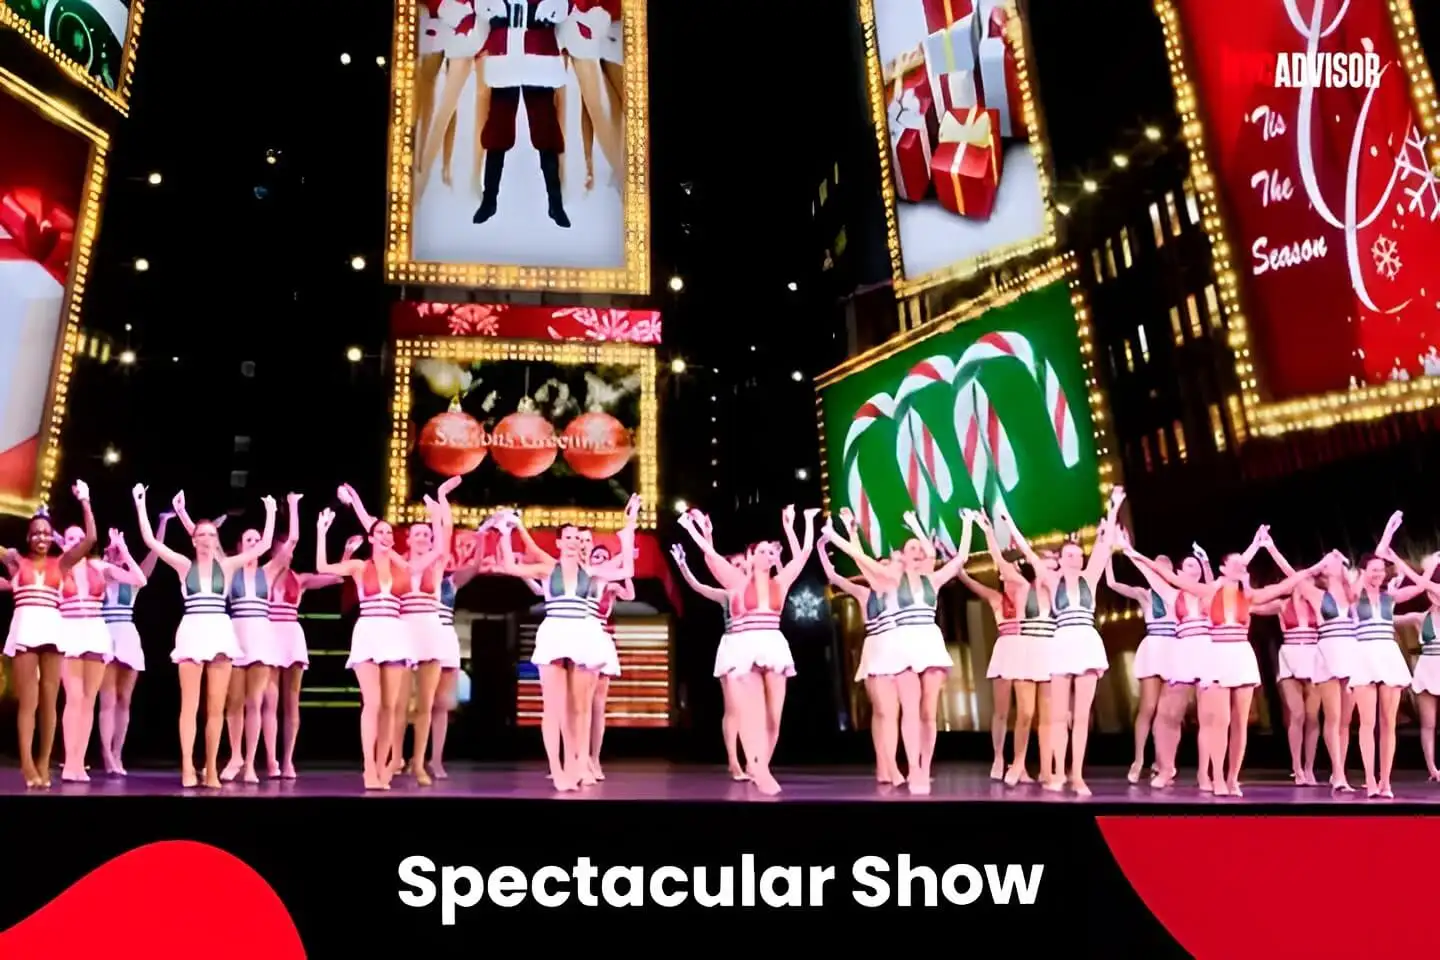 Watch the Christmas Spectacular Show in December, NYC